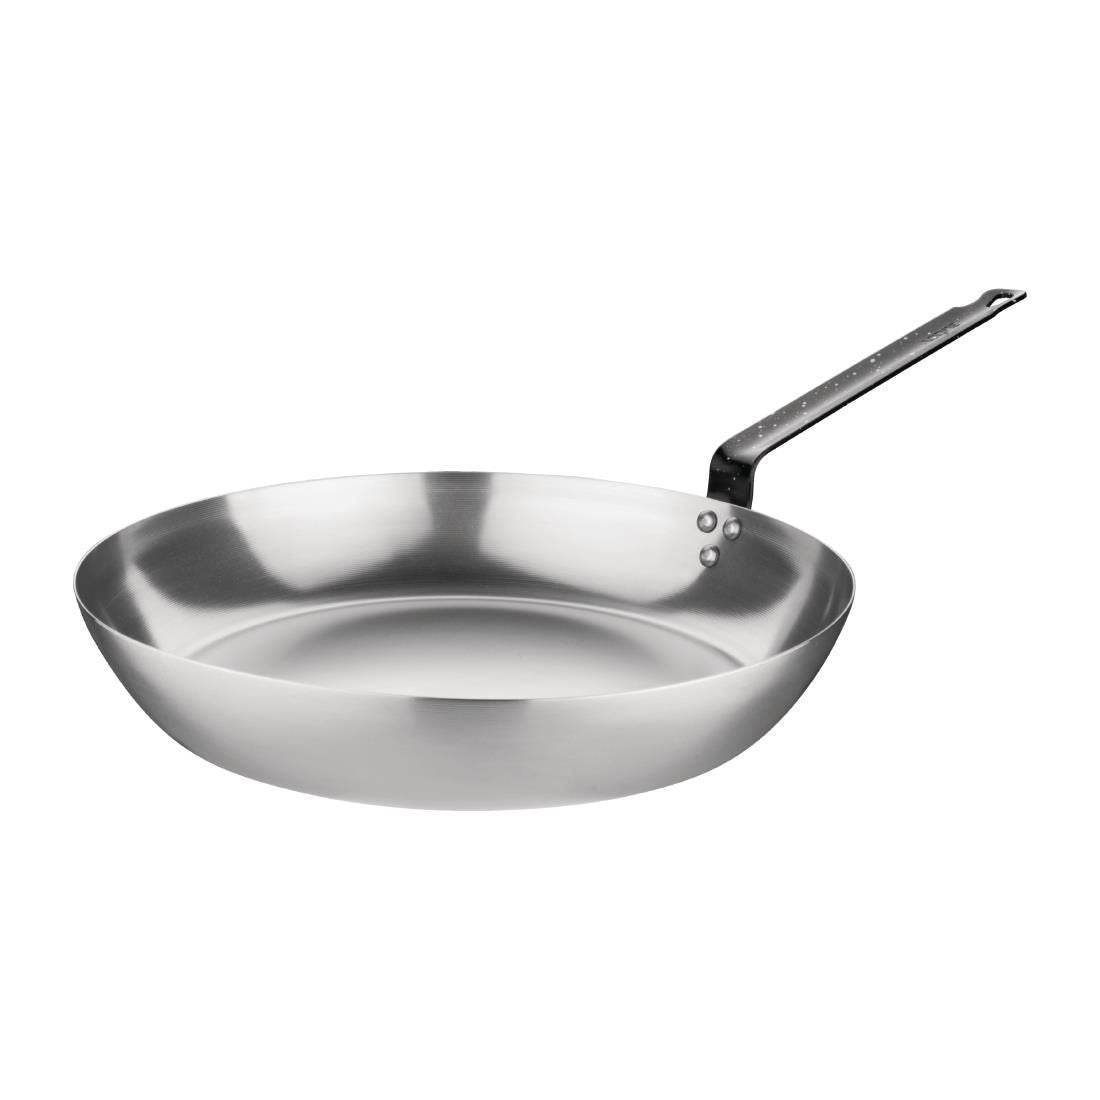 GD007 Vogue Carbon Steel Frying Pan 350mm JD Catering Equipment Solutions Ltd